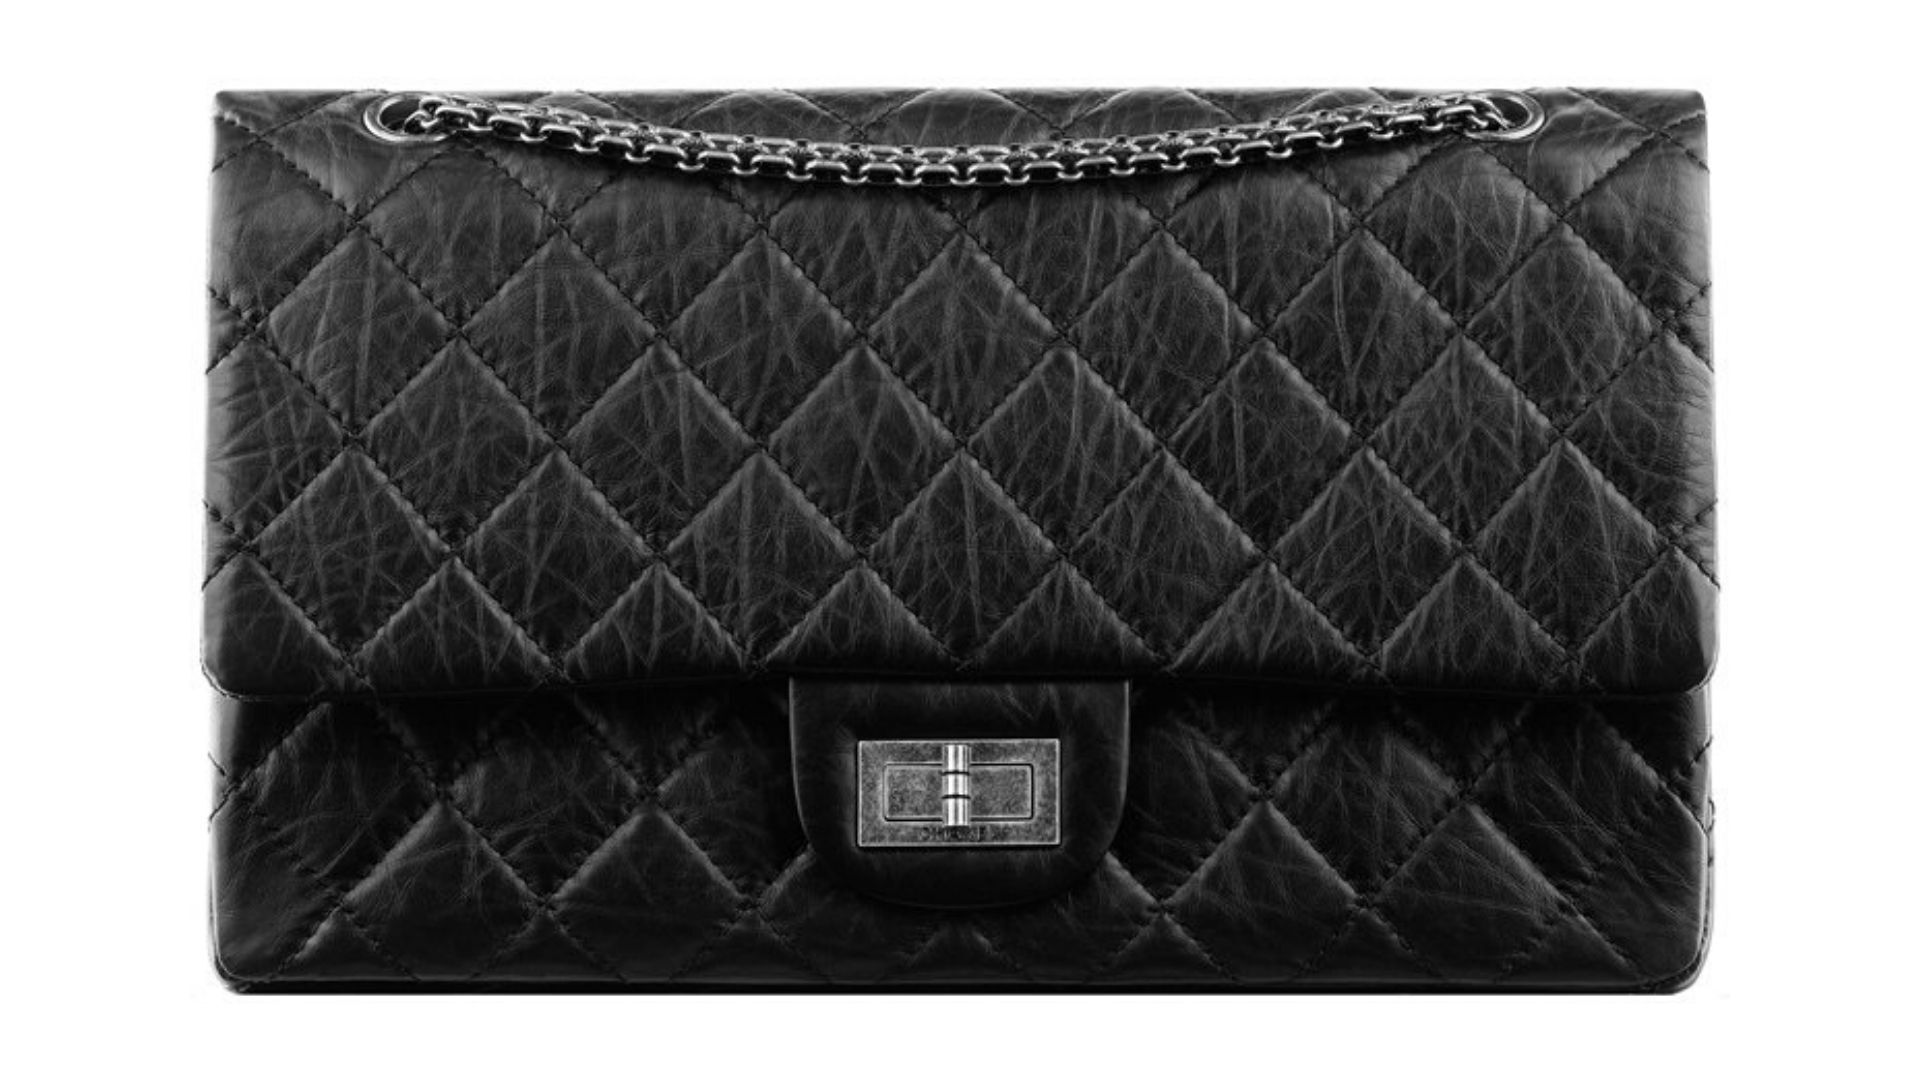 10 Most Popular Chanel Bags Of All Time